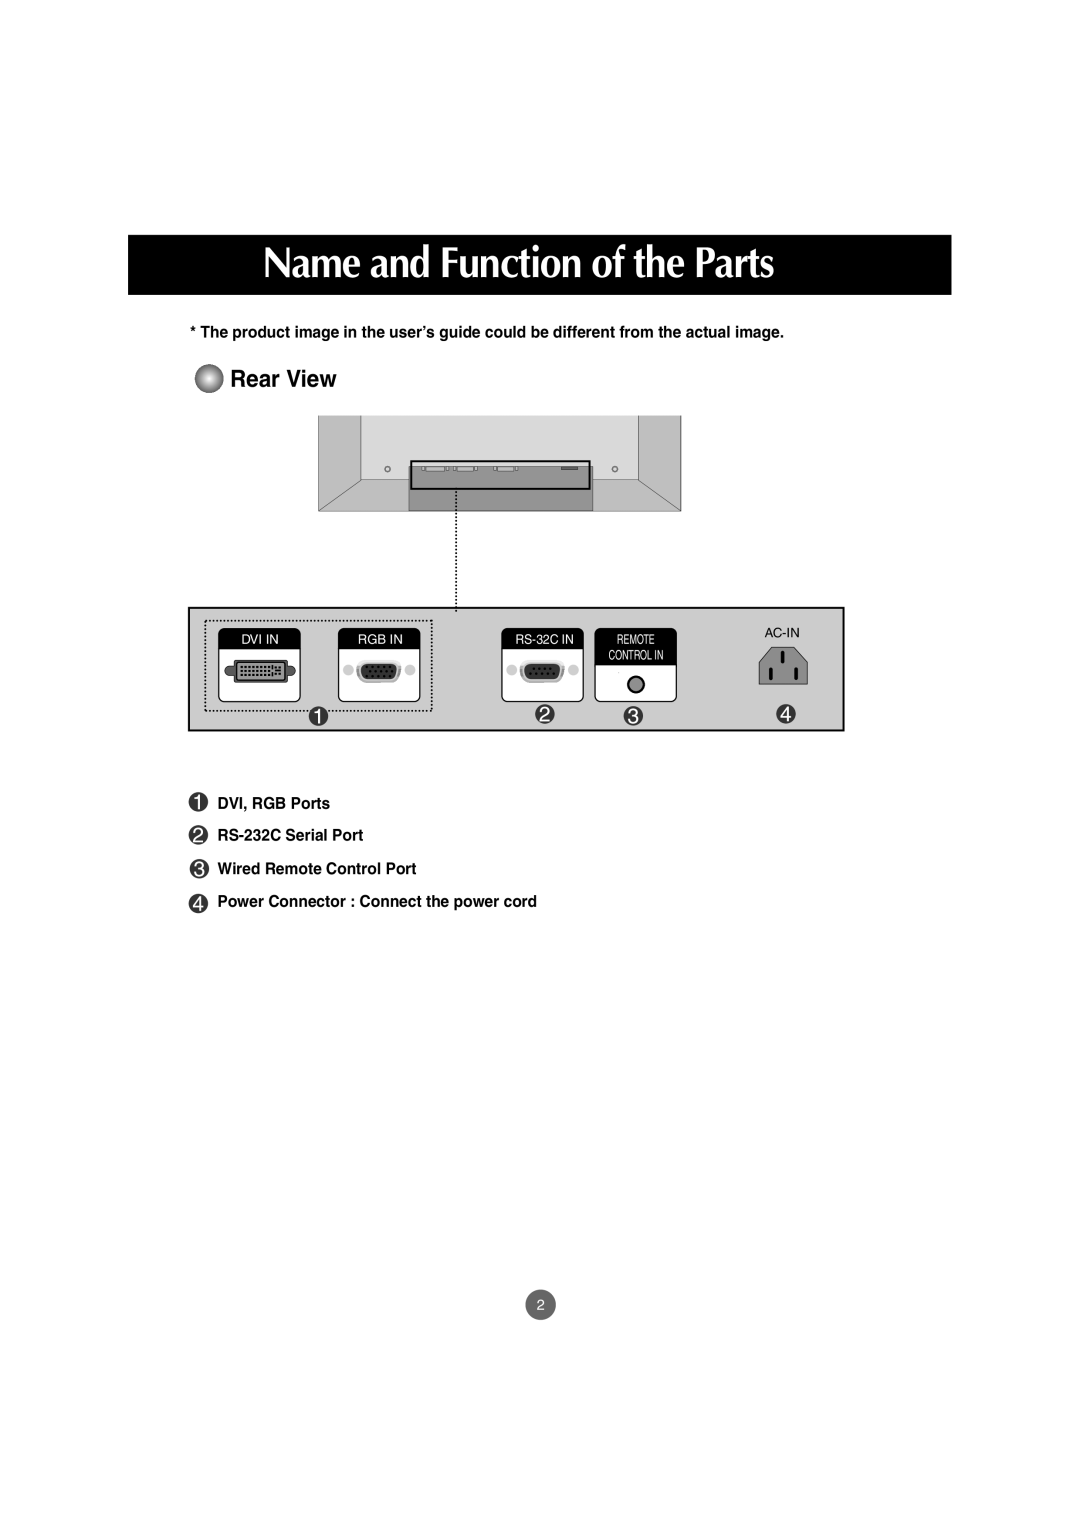 LG Electronics M3800S Name and Function of the Parts, Rear View, Power Connector Connect the power cord, Dvi In, Rgb In 